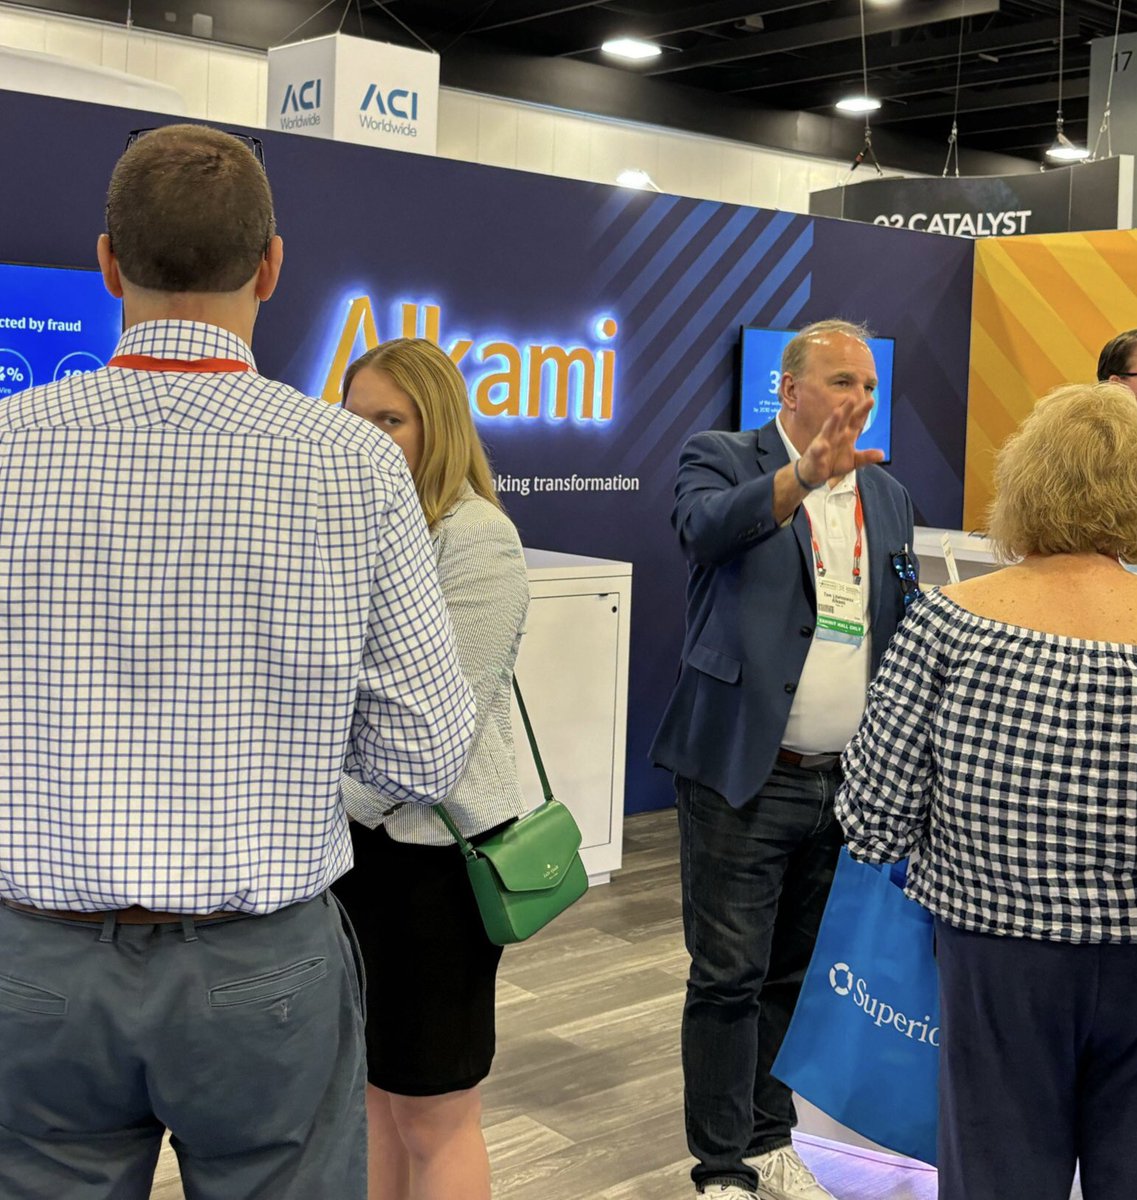 Are you here with us at #Payments2024? Be sure to stop by our booth #426! We’ve got demos, giveaways and a great group ready to answer your questions!